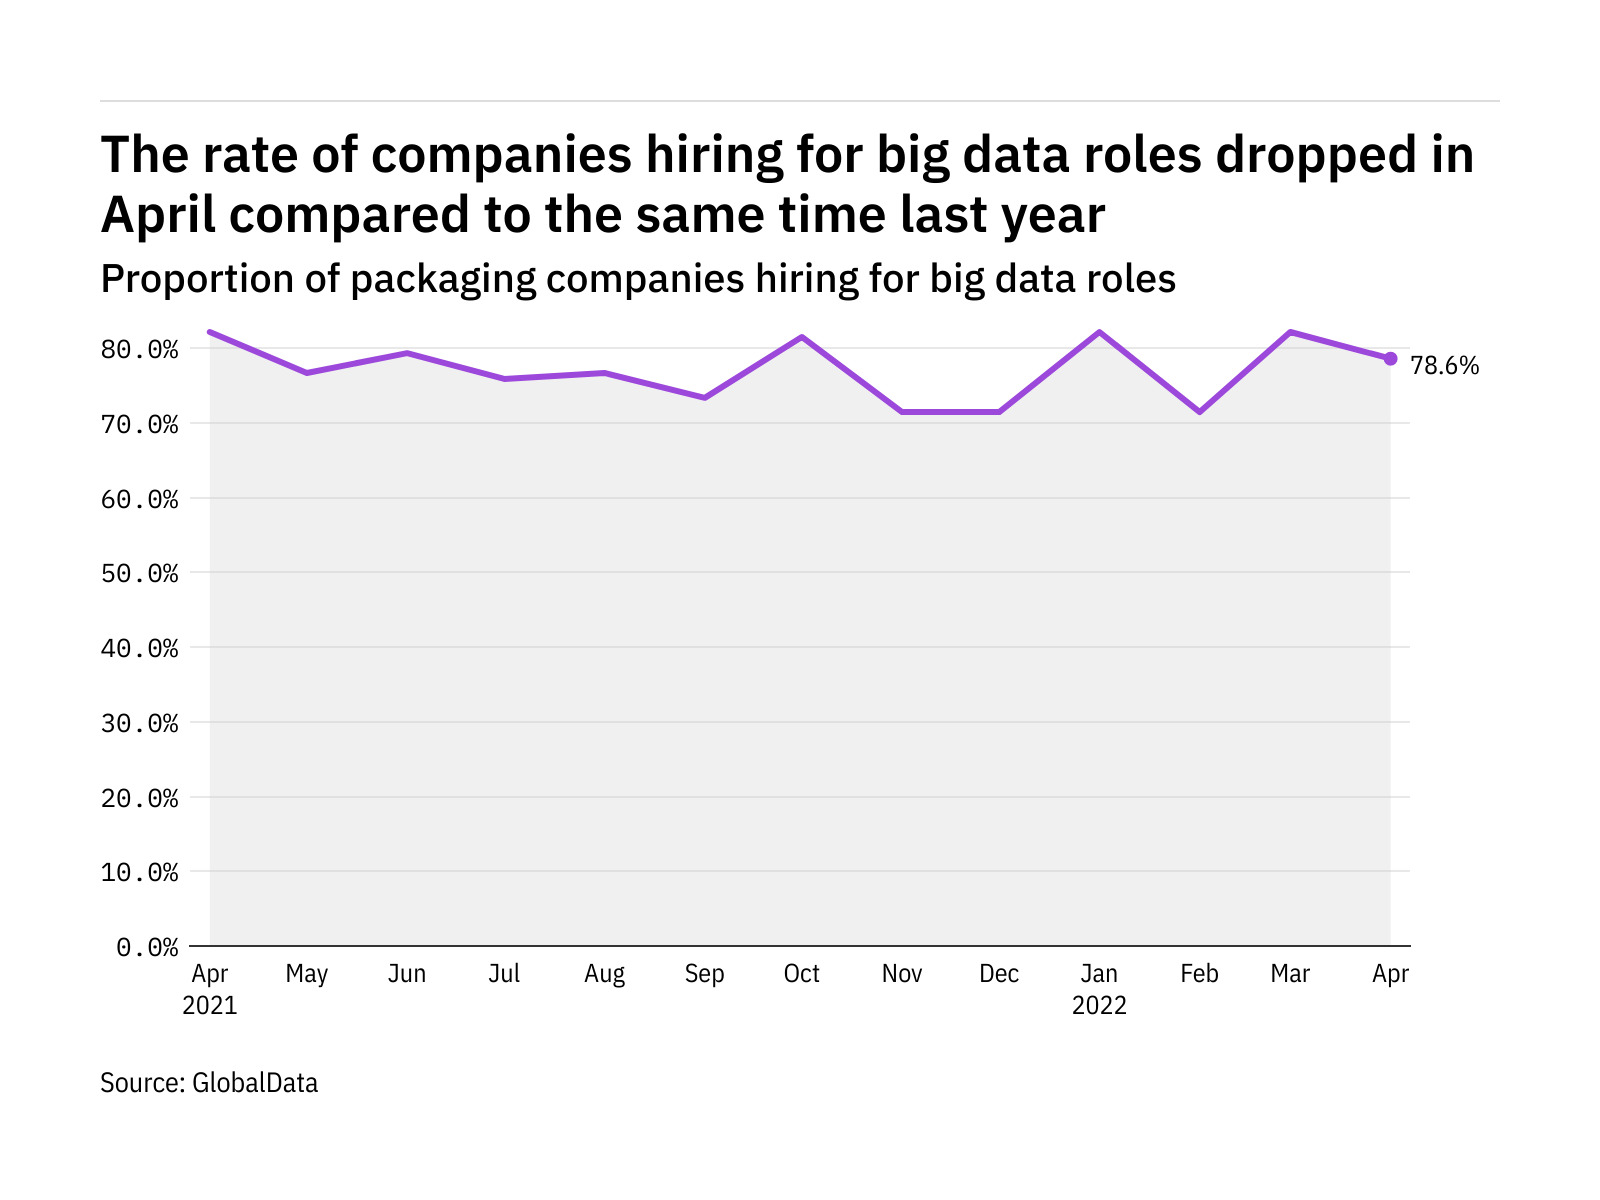 Big data hiring levels in the packaging industry dropped in April 2022